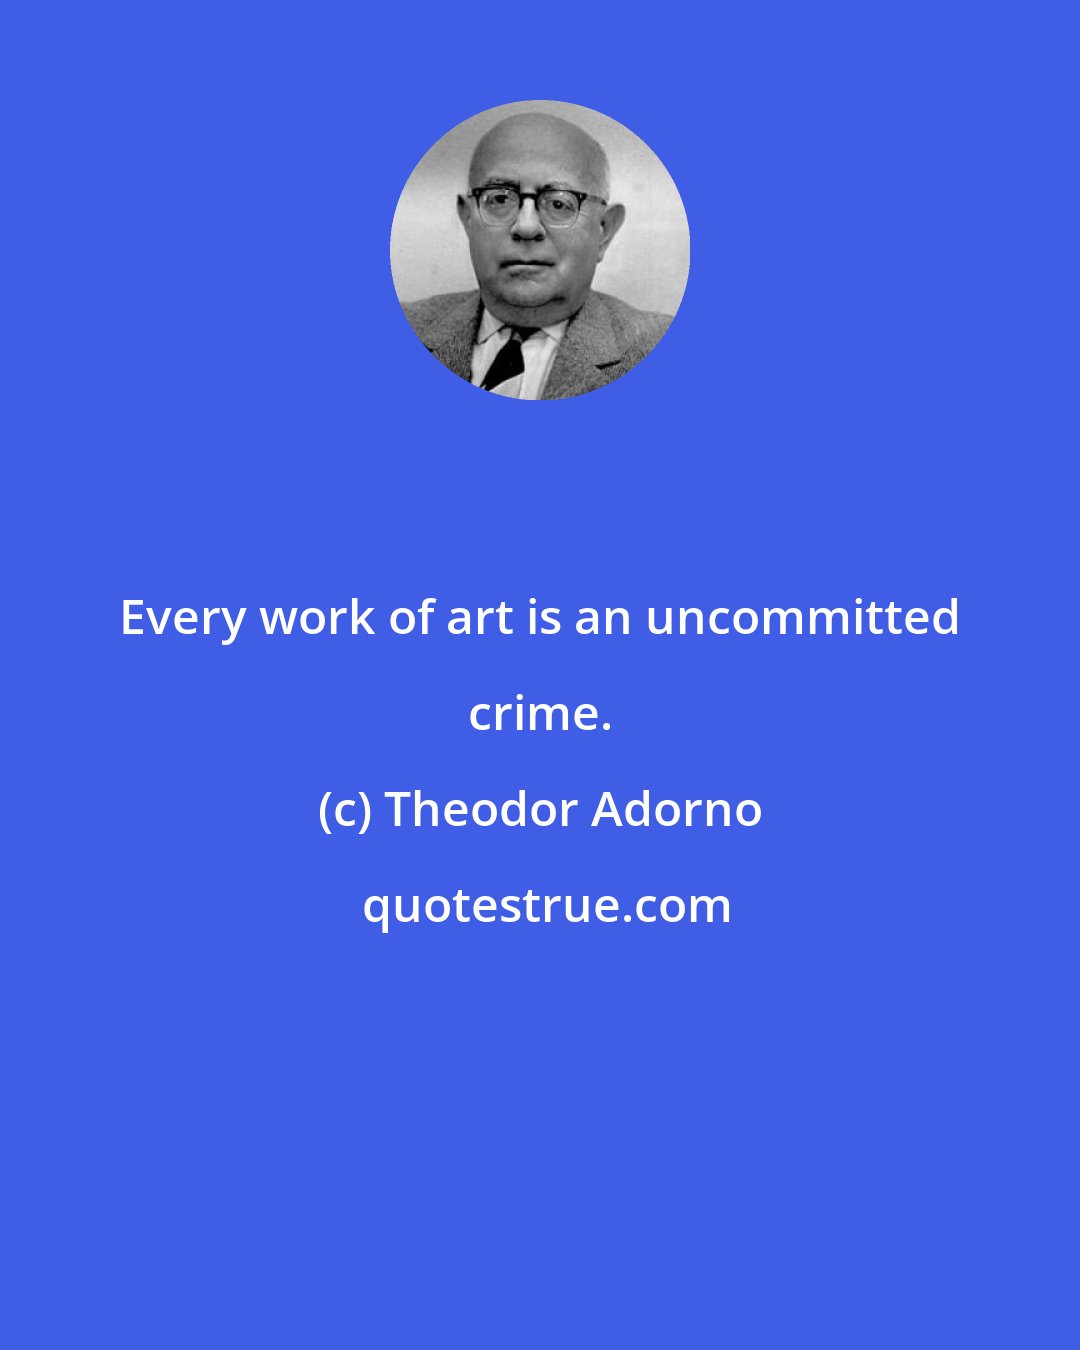 Theodor Adorno: Every work of art is an uncommitted crime.